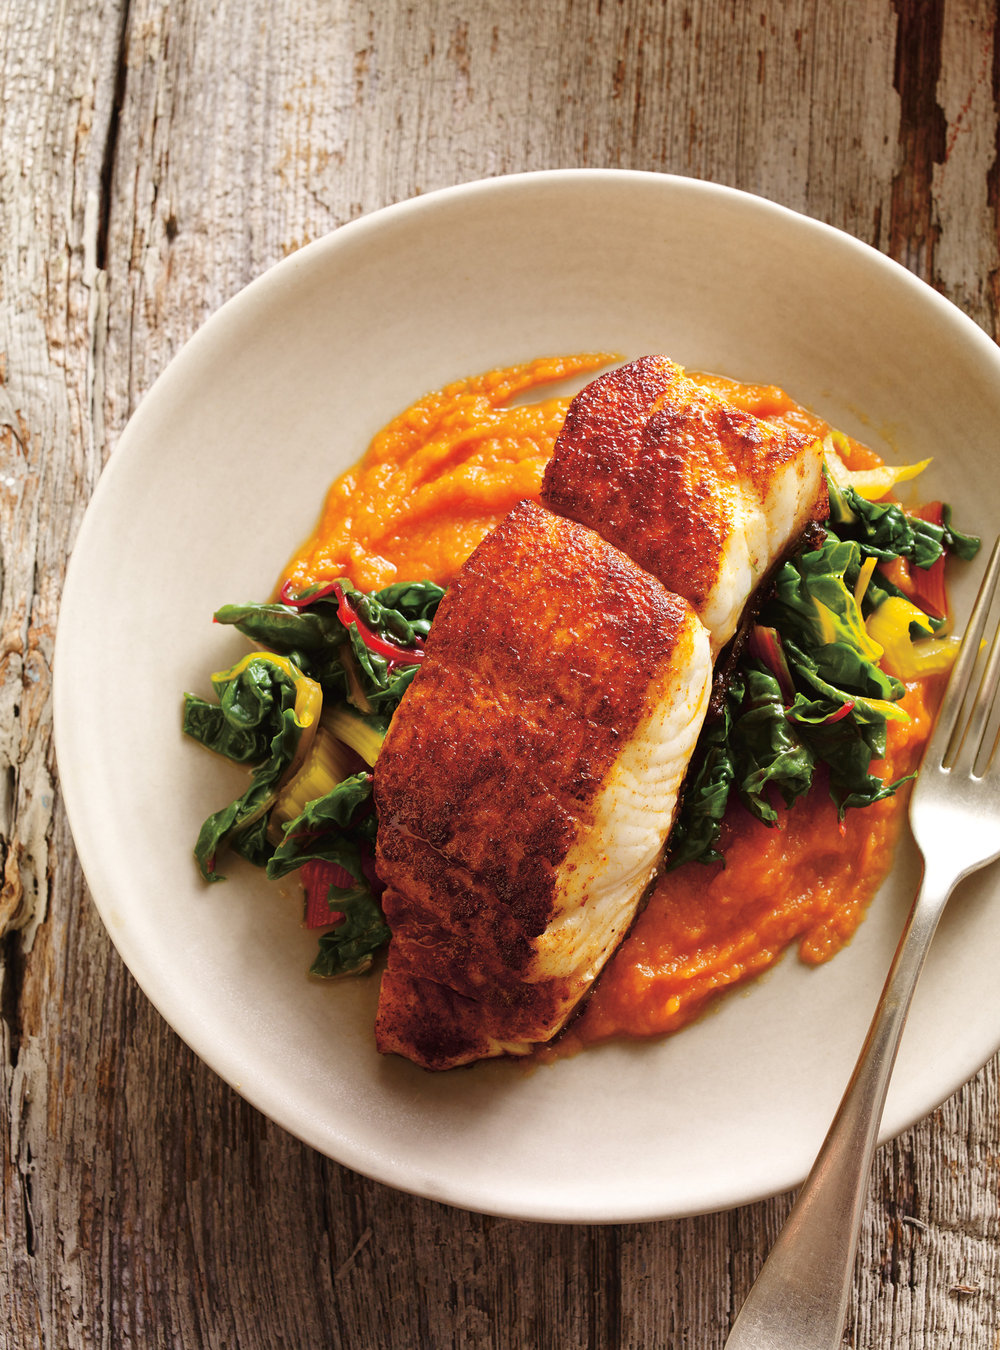 Seared Spiced Fish with Carrot Purée